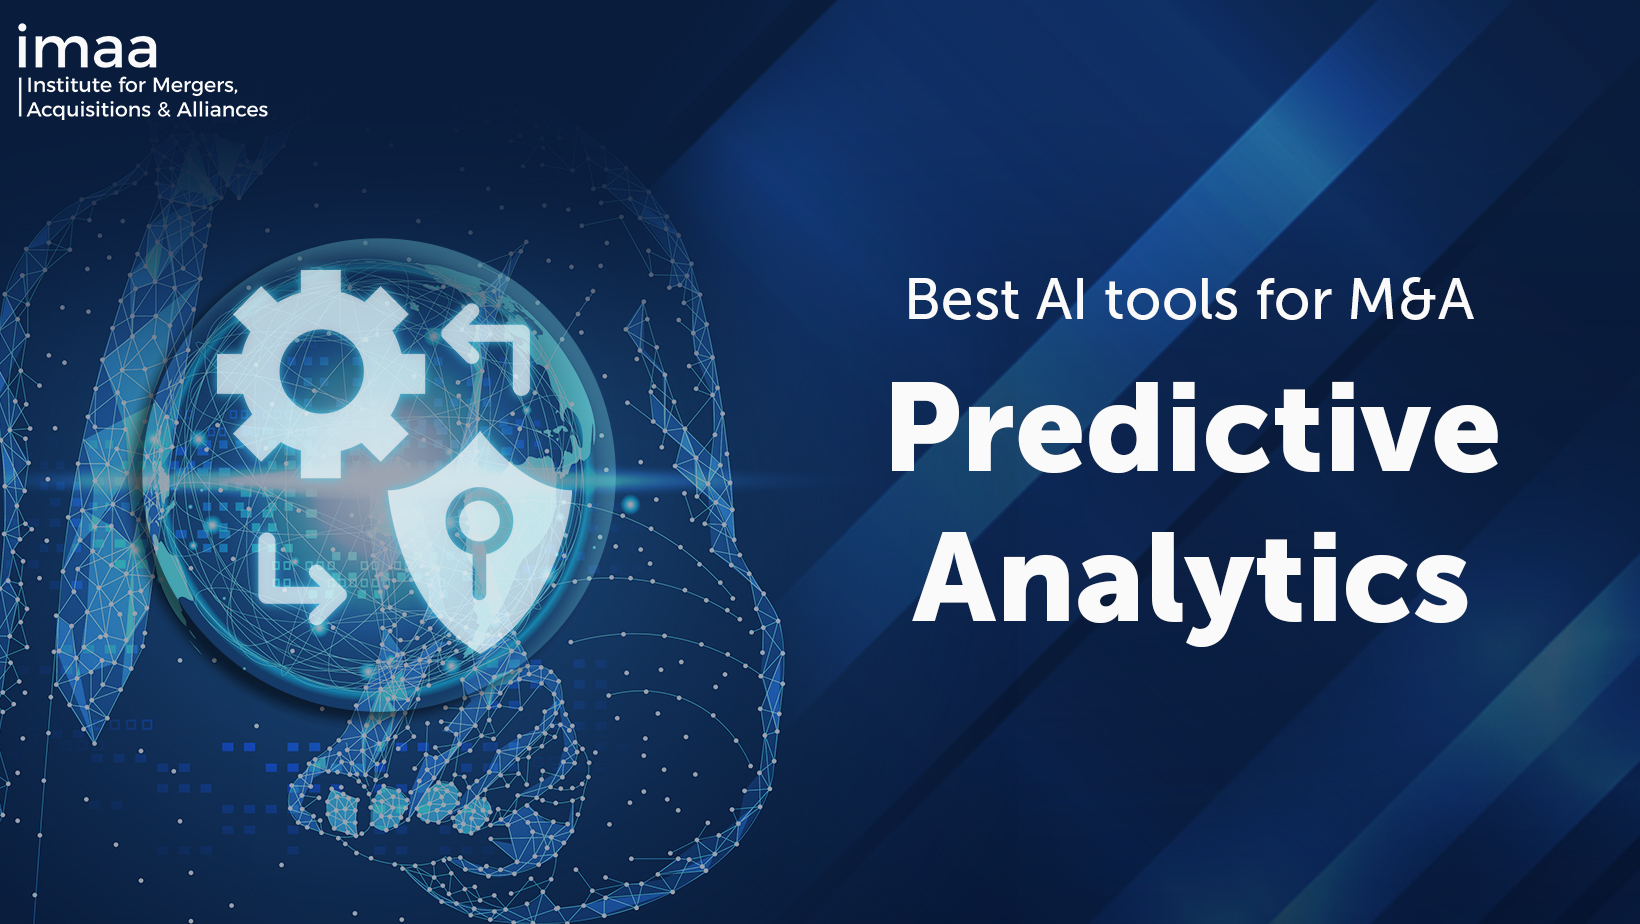 Best AI Tools for Predictive Analytics in M&A